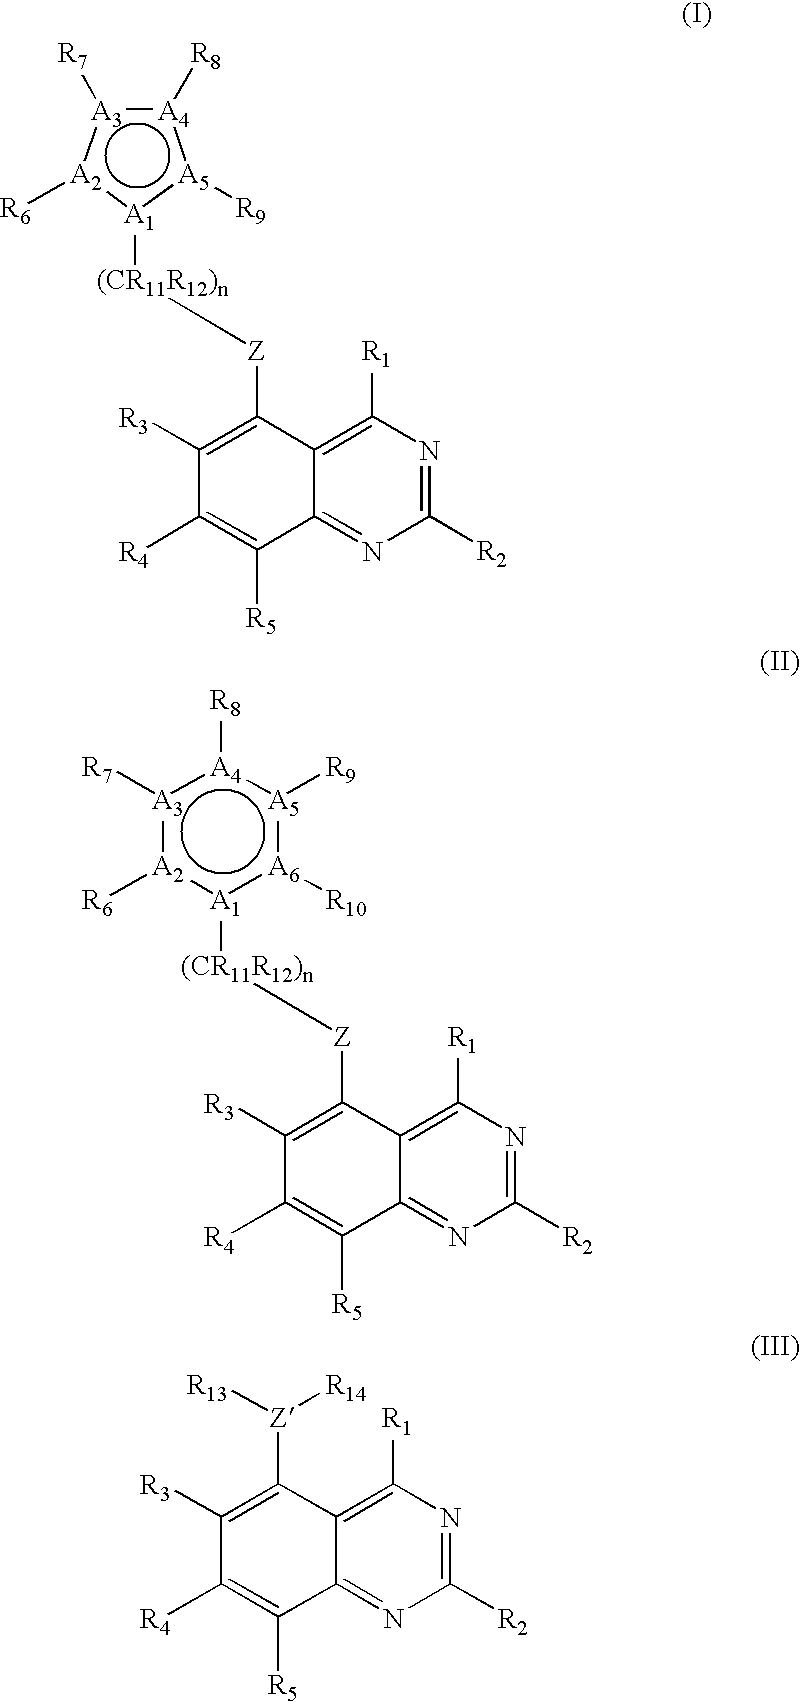 Methods of modulating serine/threonine protein kinase function with quinazoline-based compounds